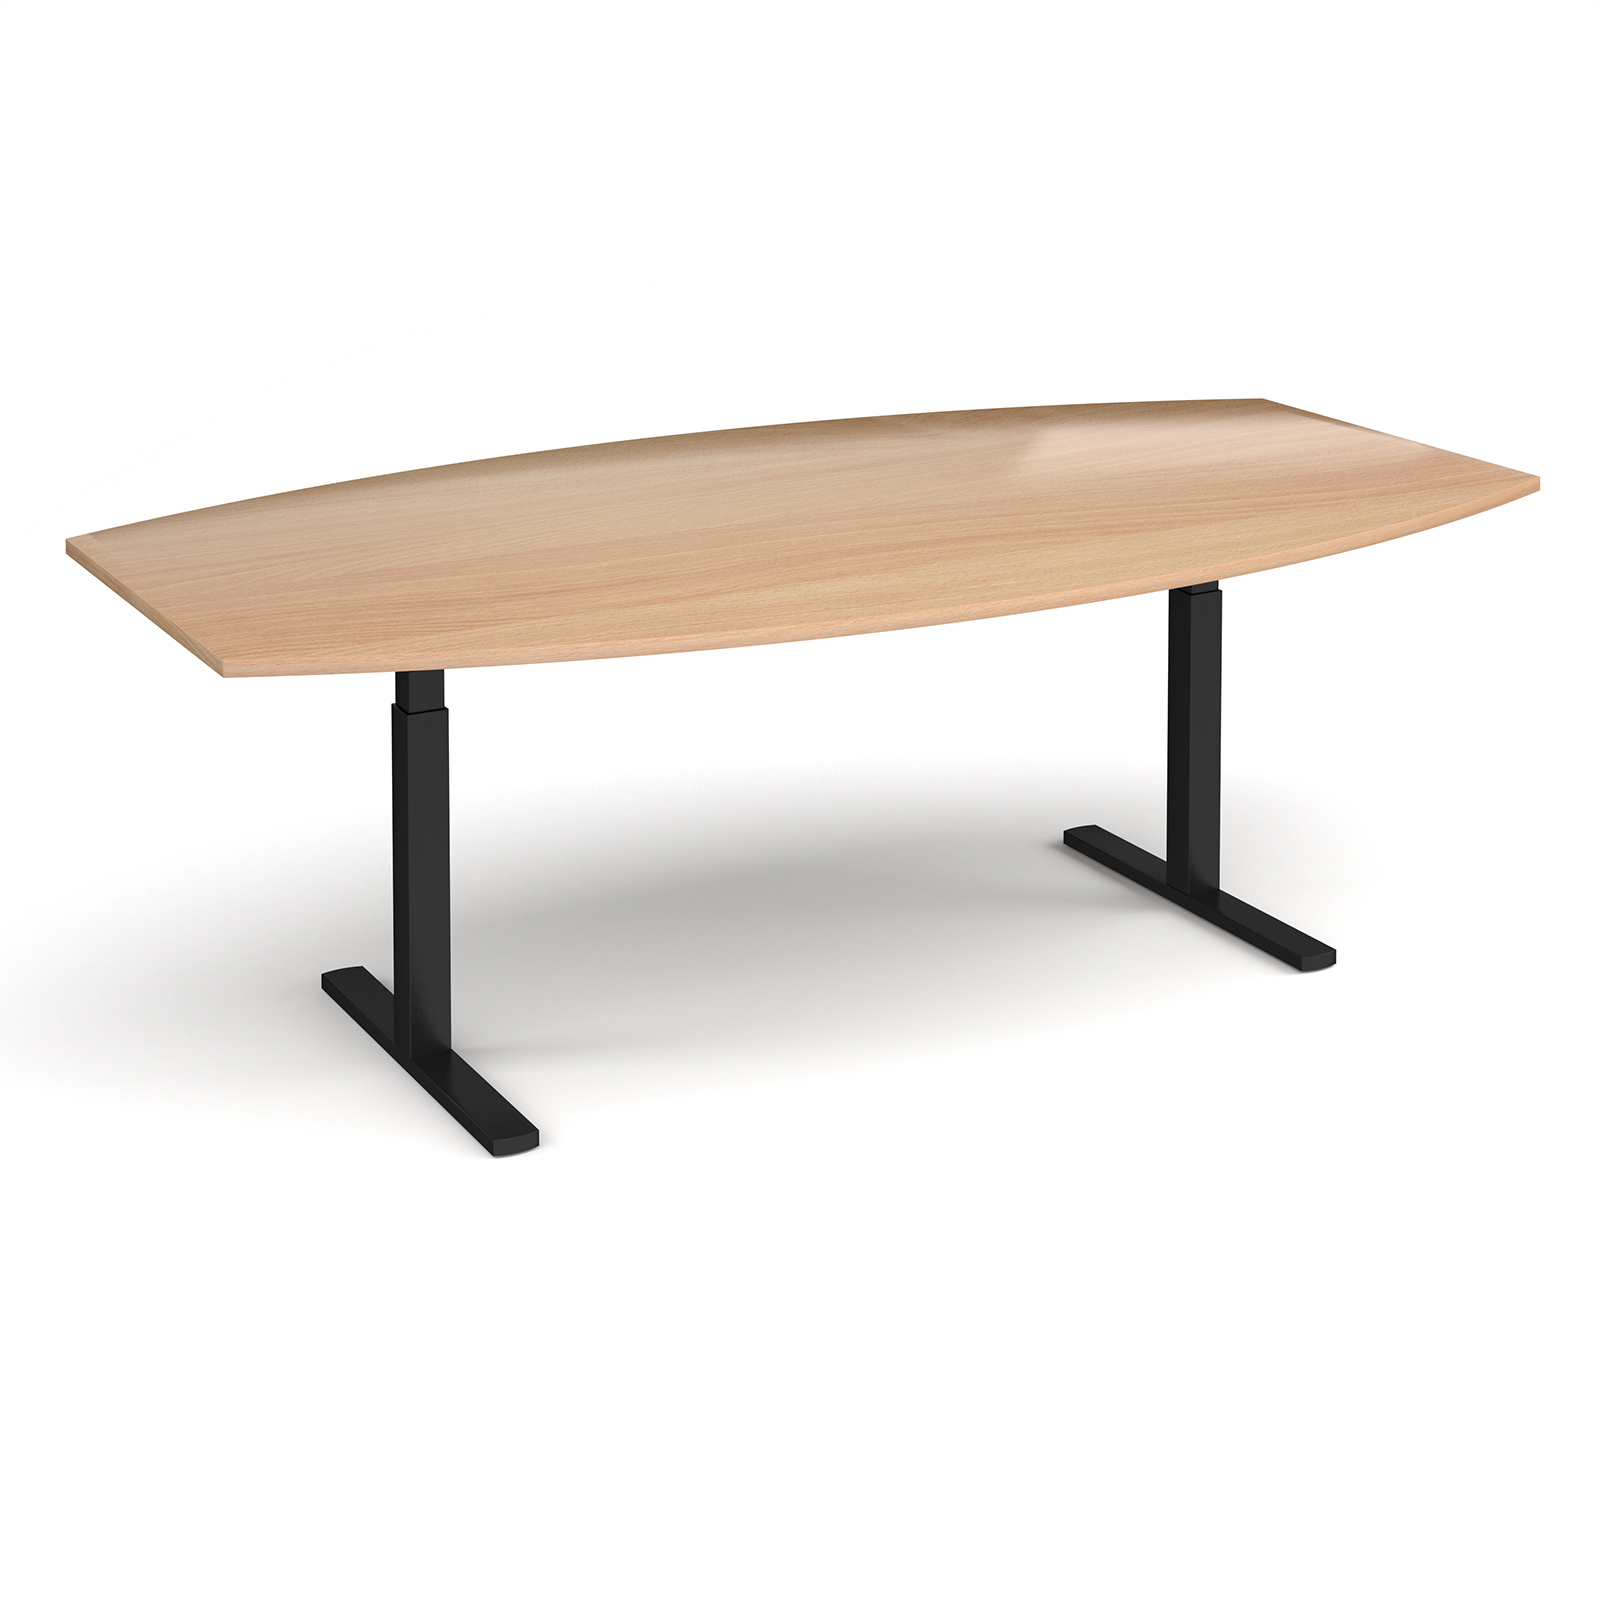 Elev8 Touch radial boardroom table 2400mm x 800/1300mm - black frame, beech top